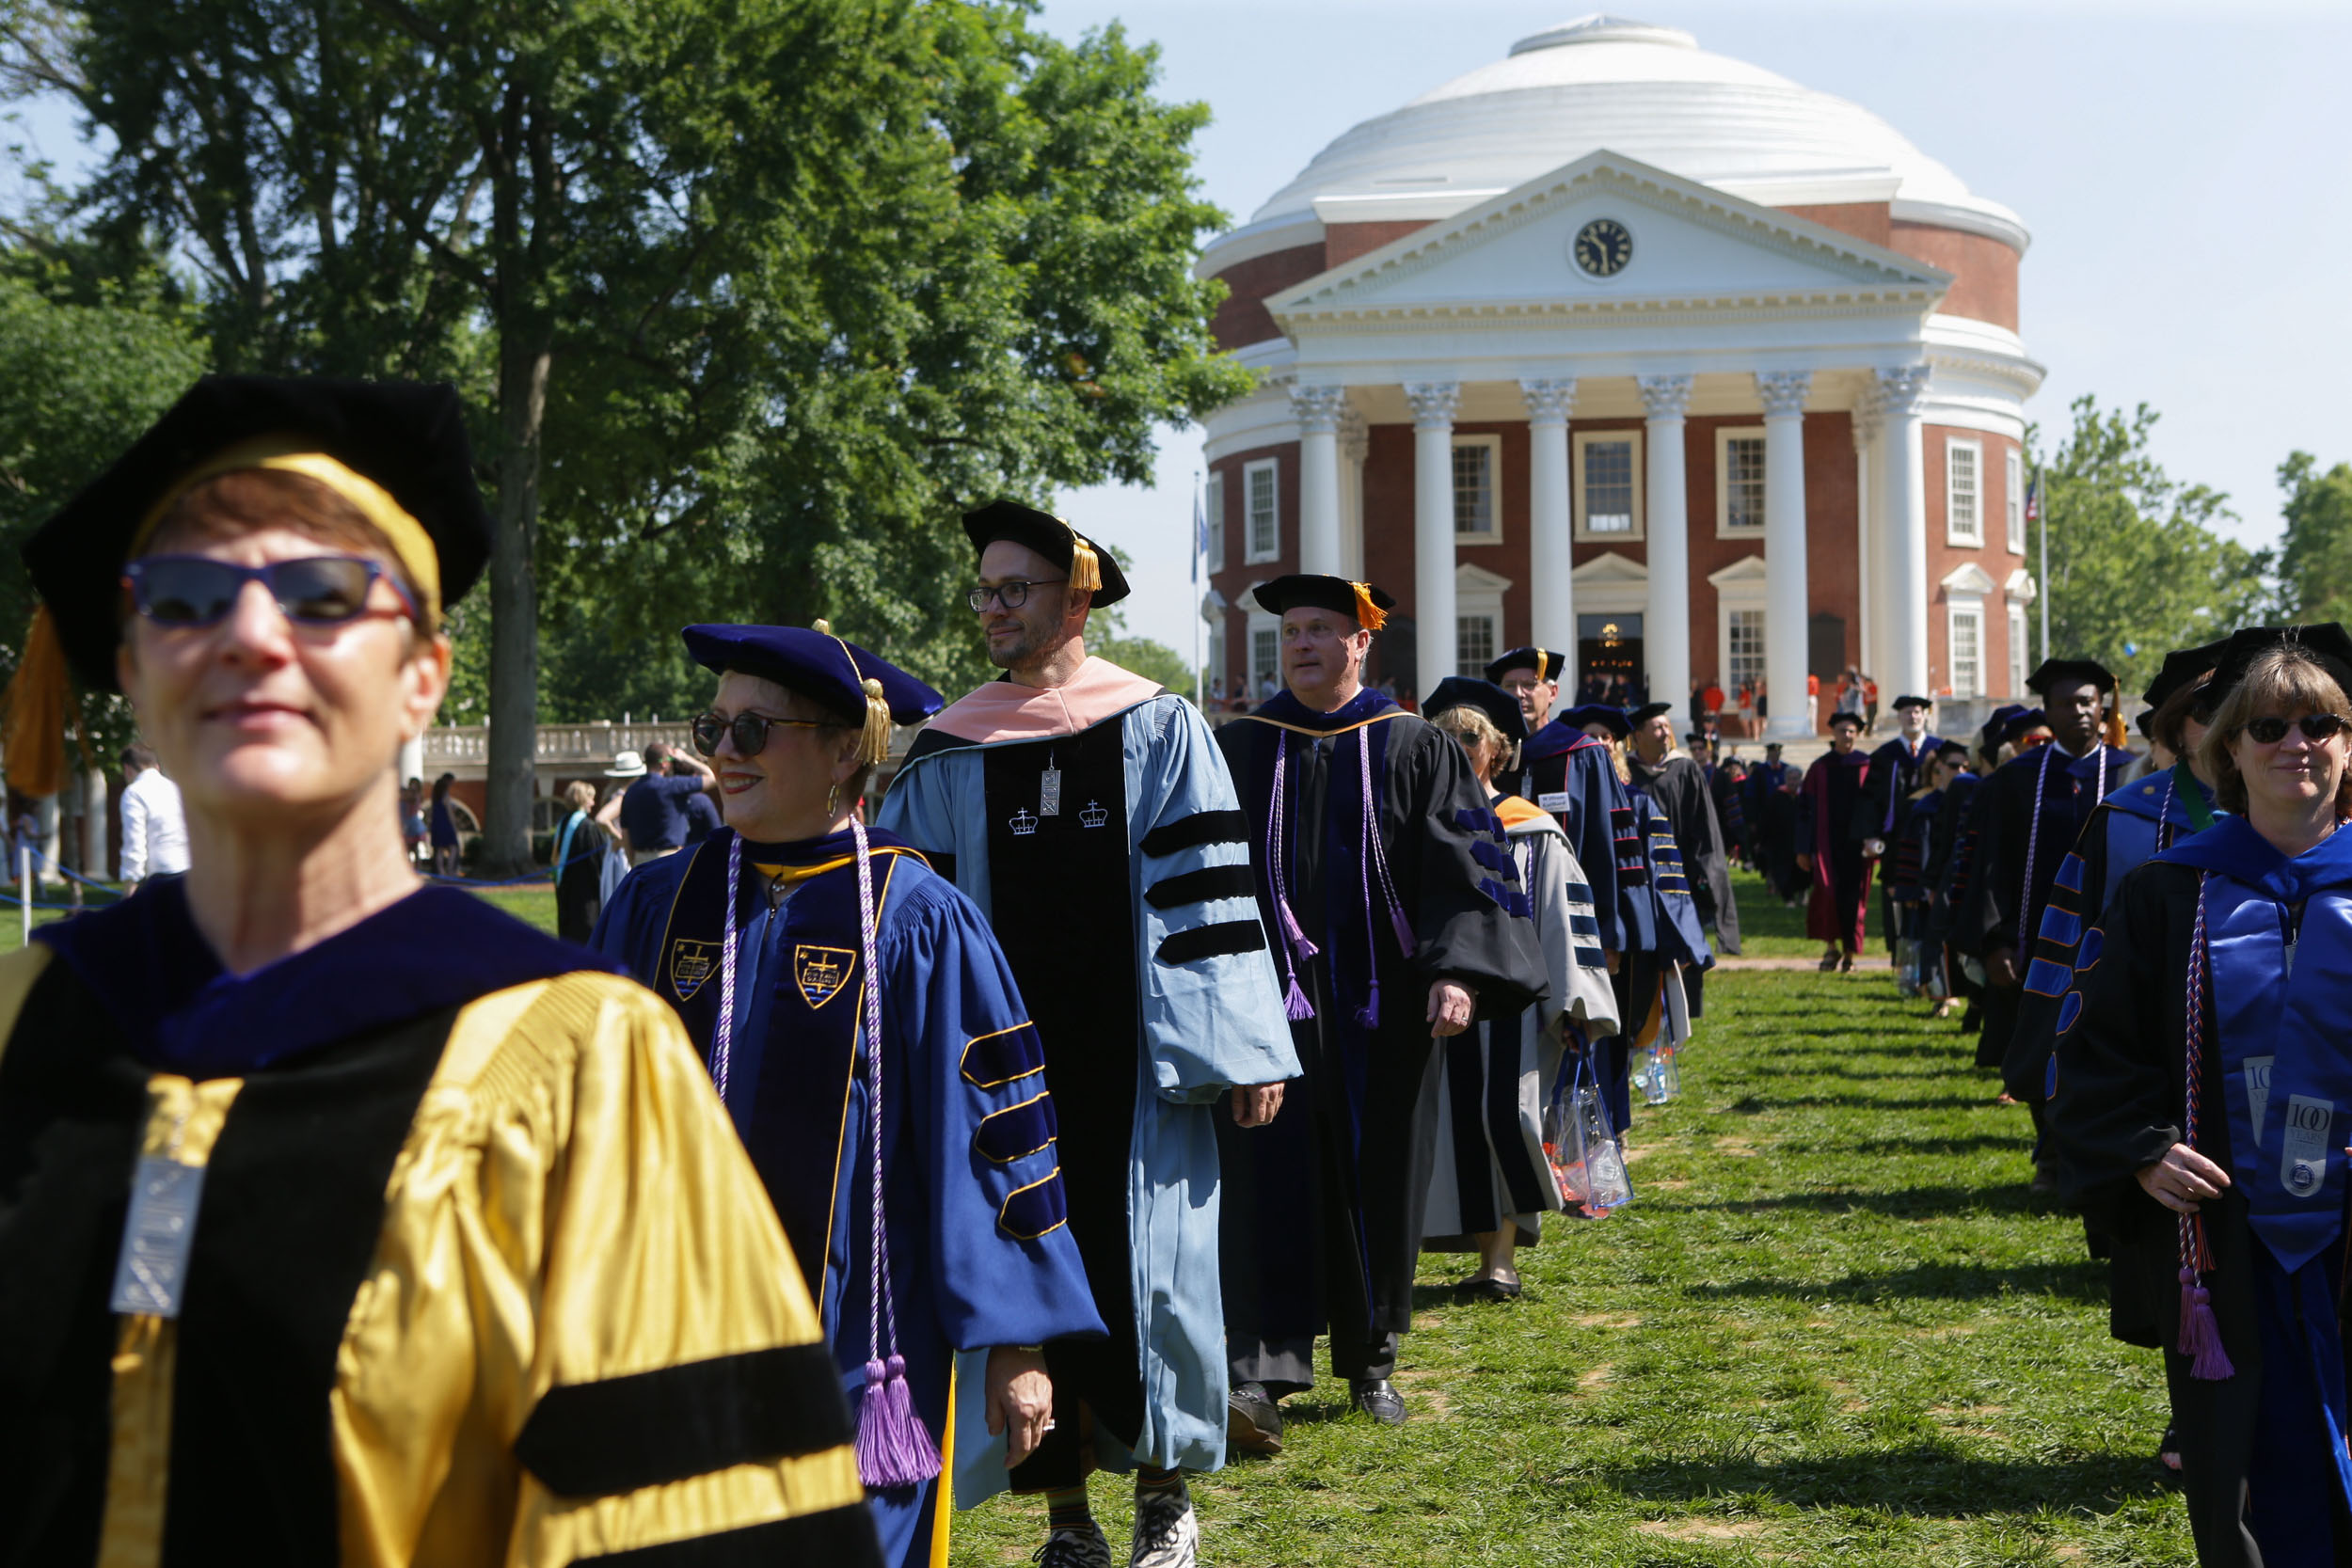 Graduates walking out of the Rotunda on the Lawn